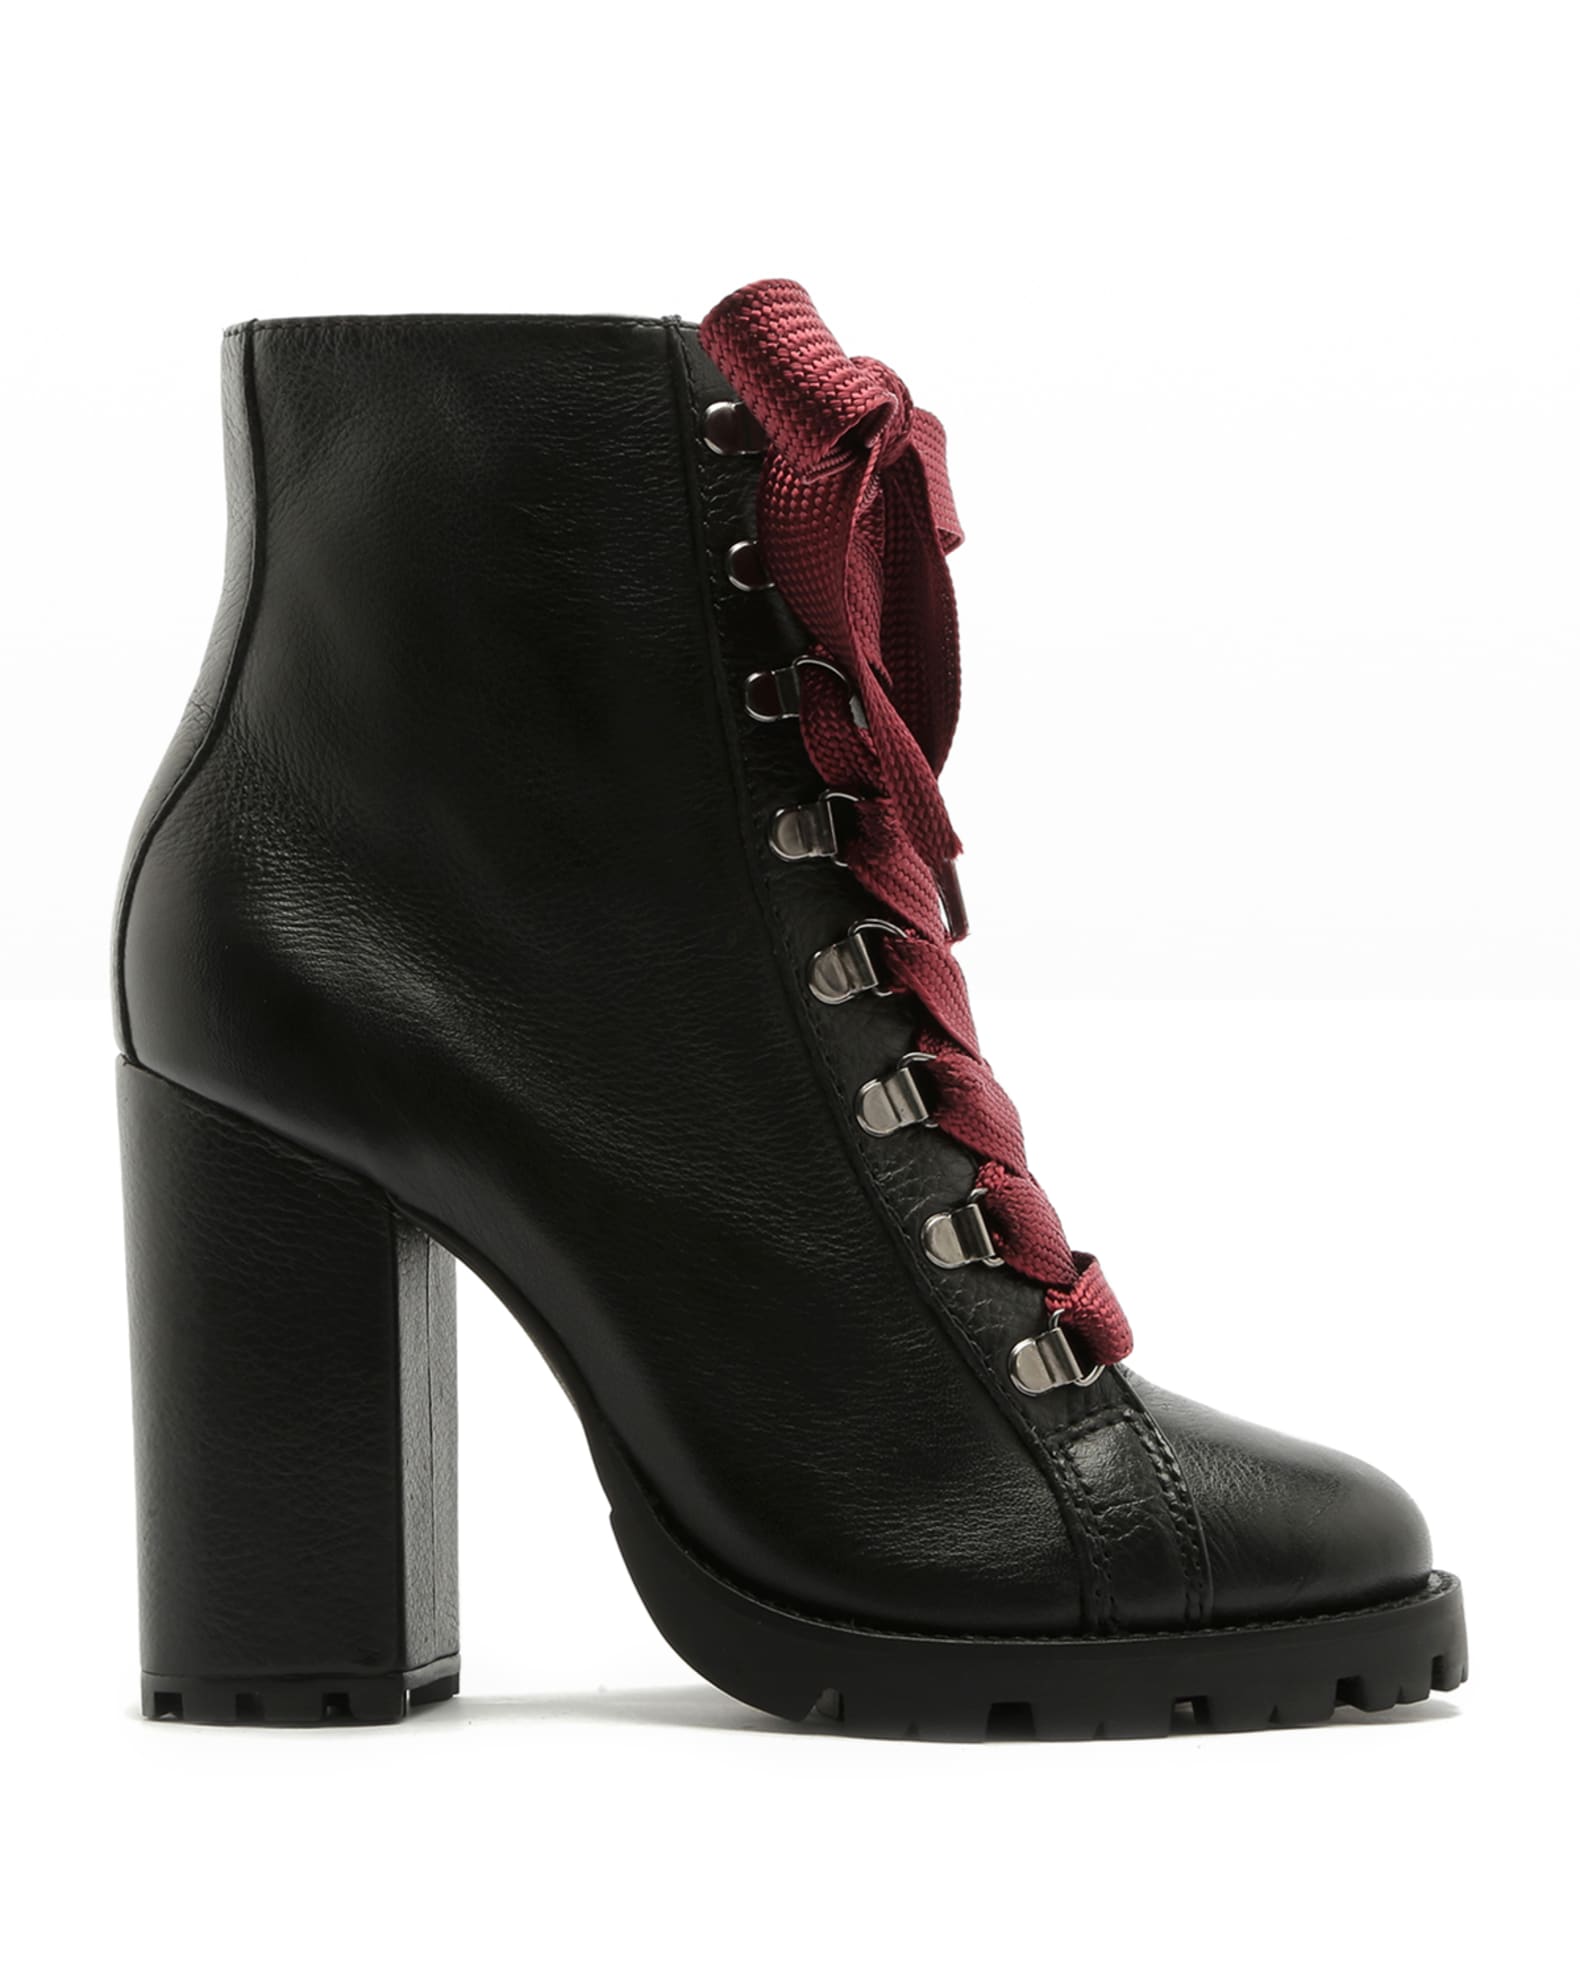 Louis Vuitton Puffer Wedge Lace-Up Boots